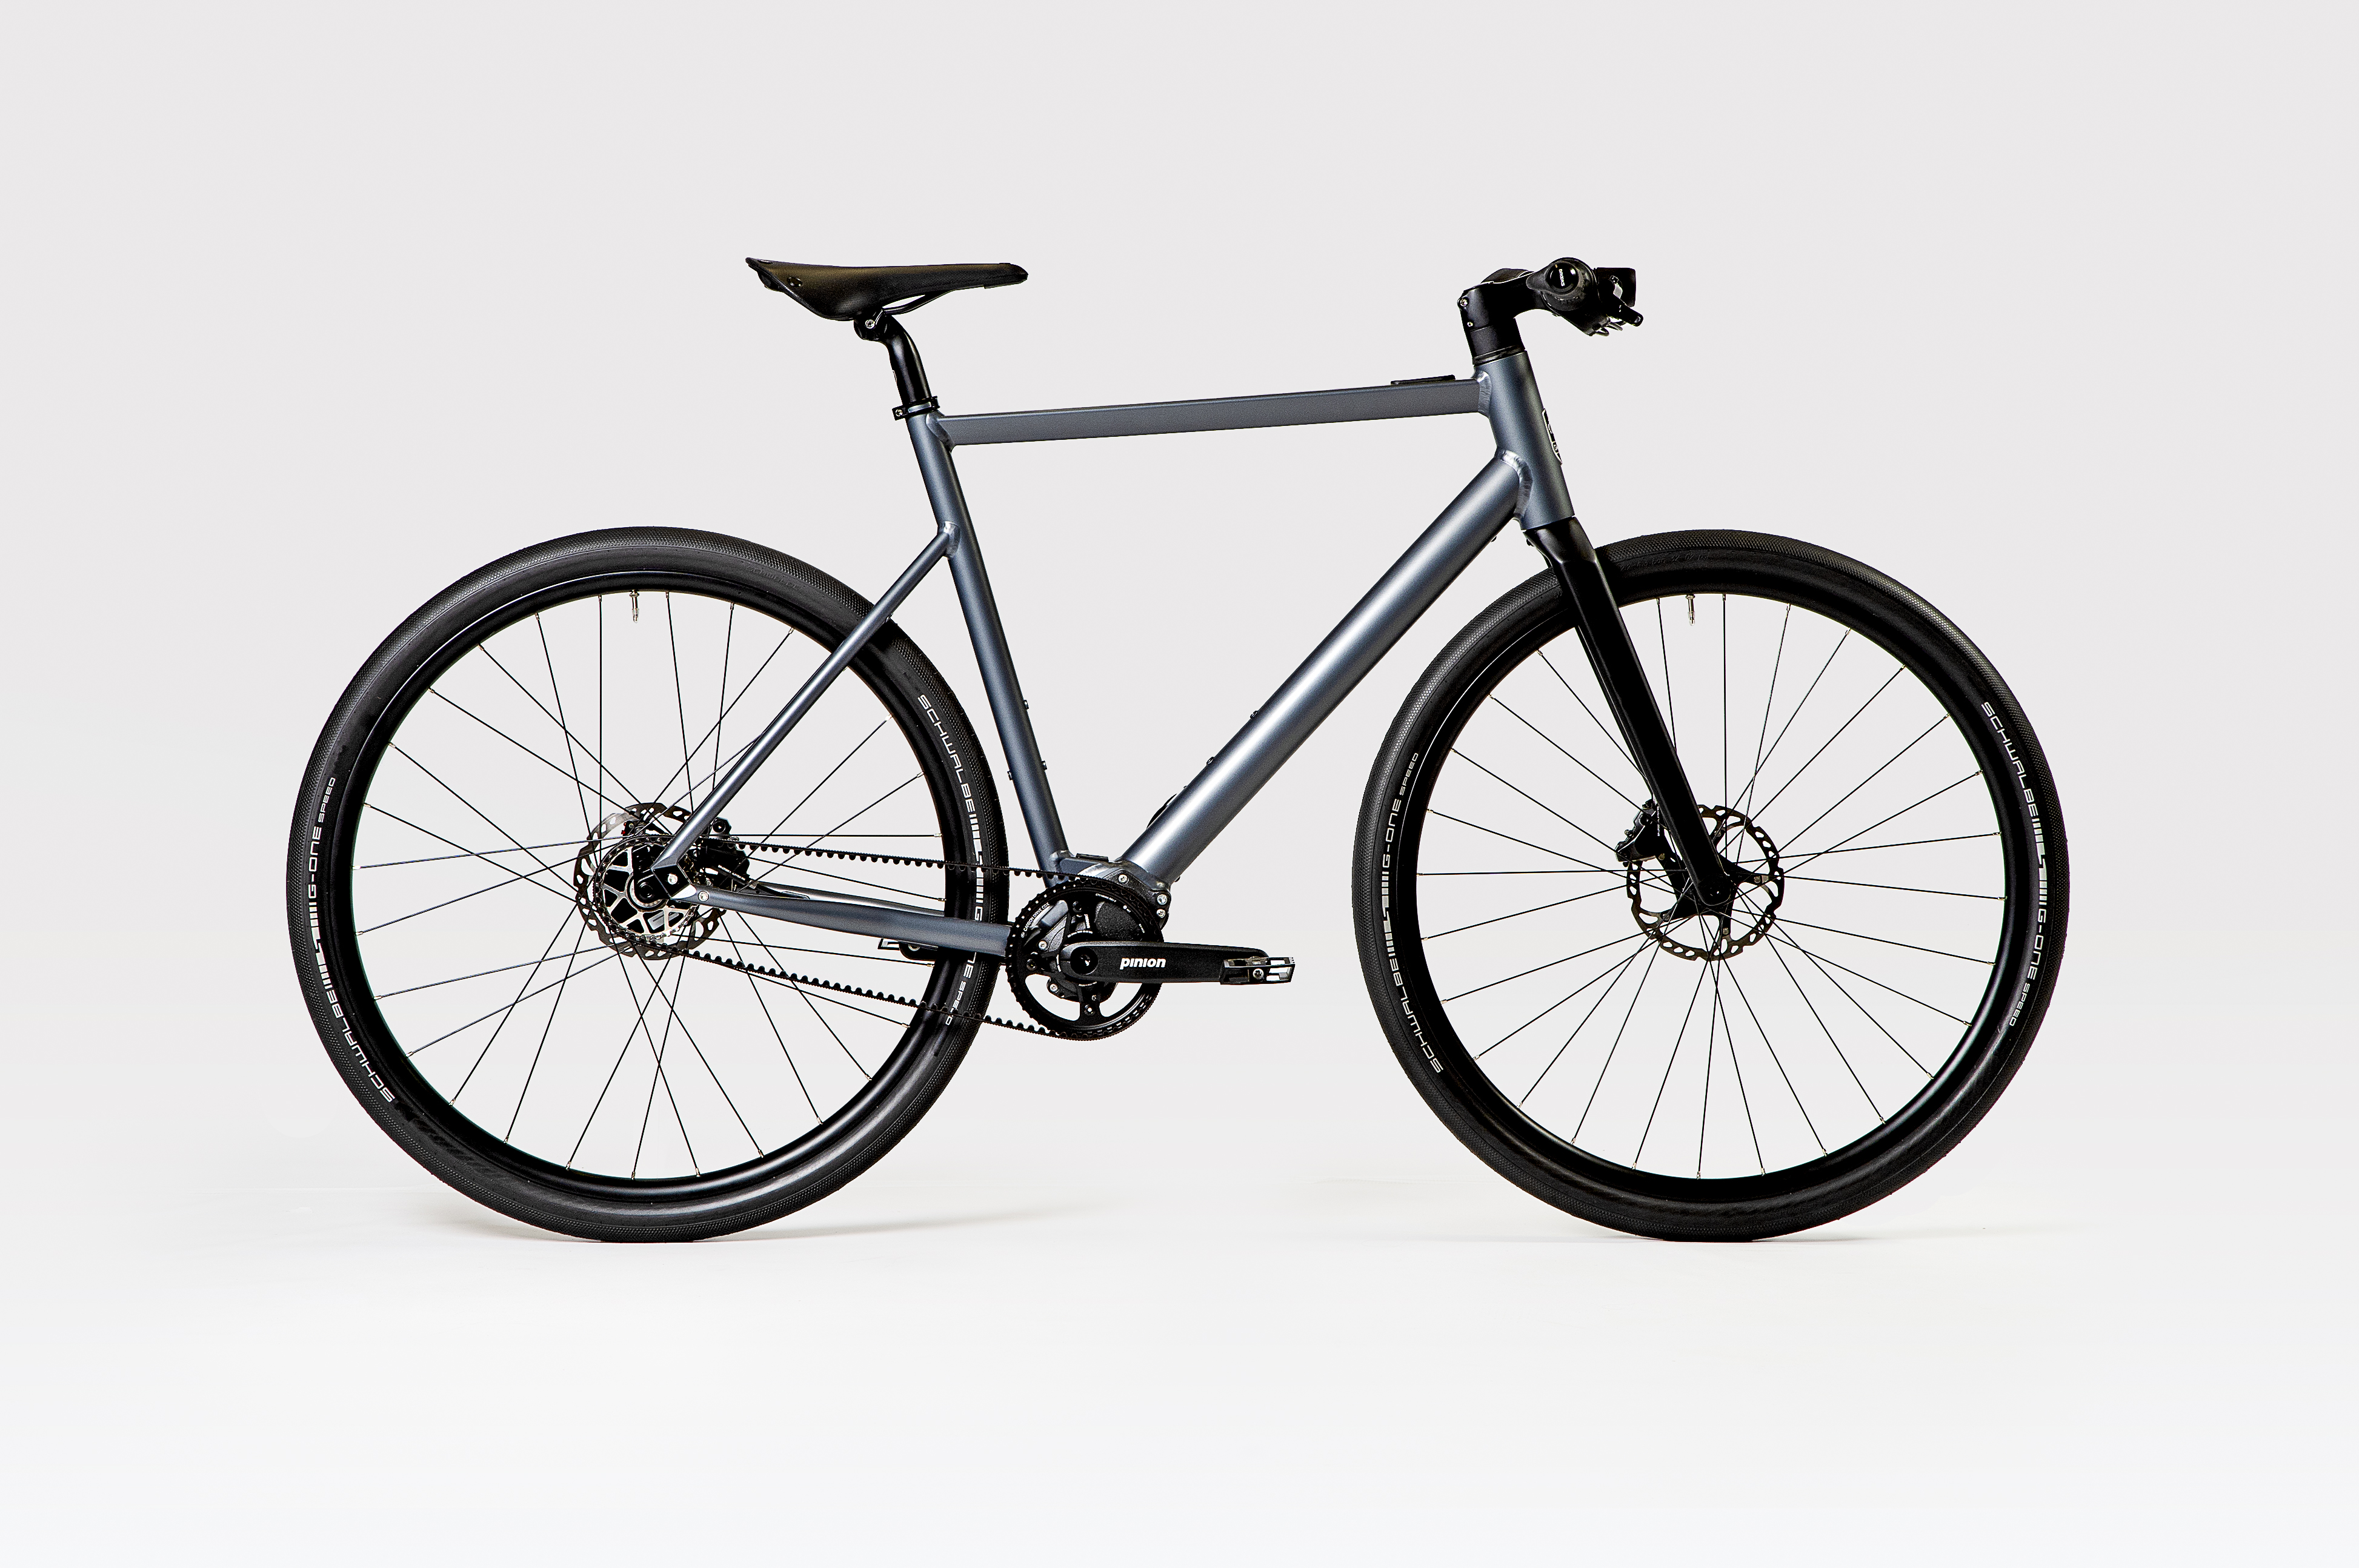 Desiknio's ebikes use gearboxes and belt drives for hassle-free commuting